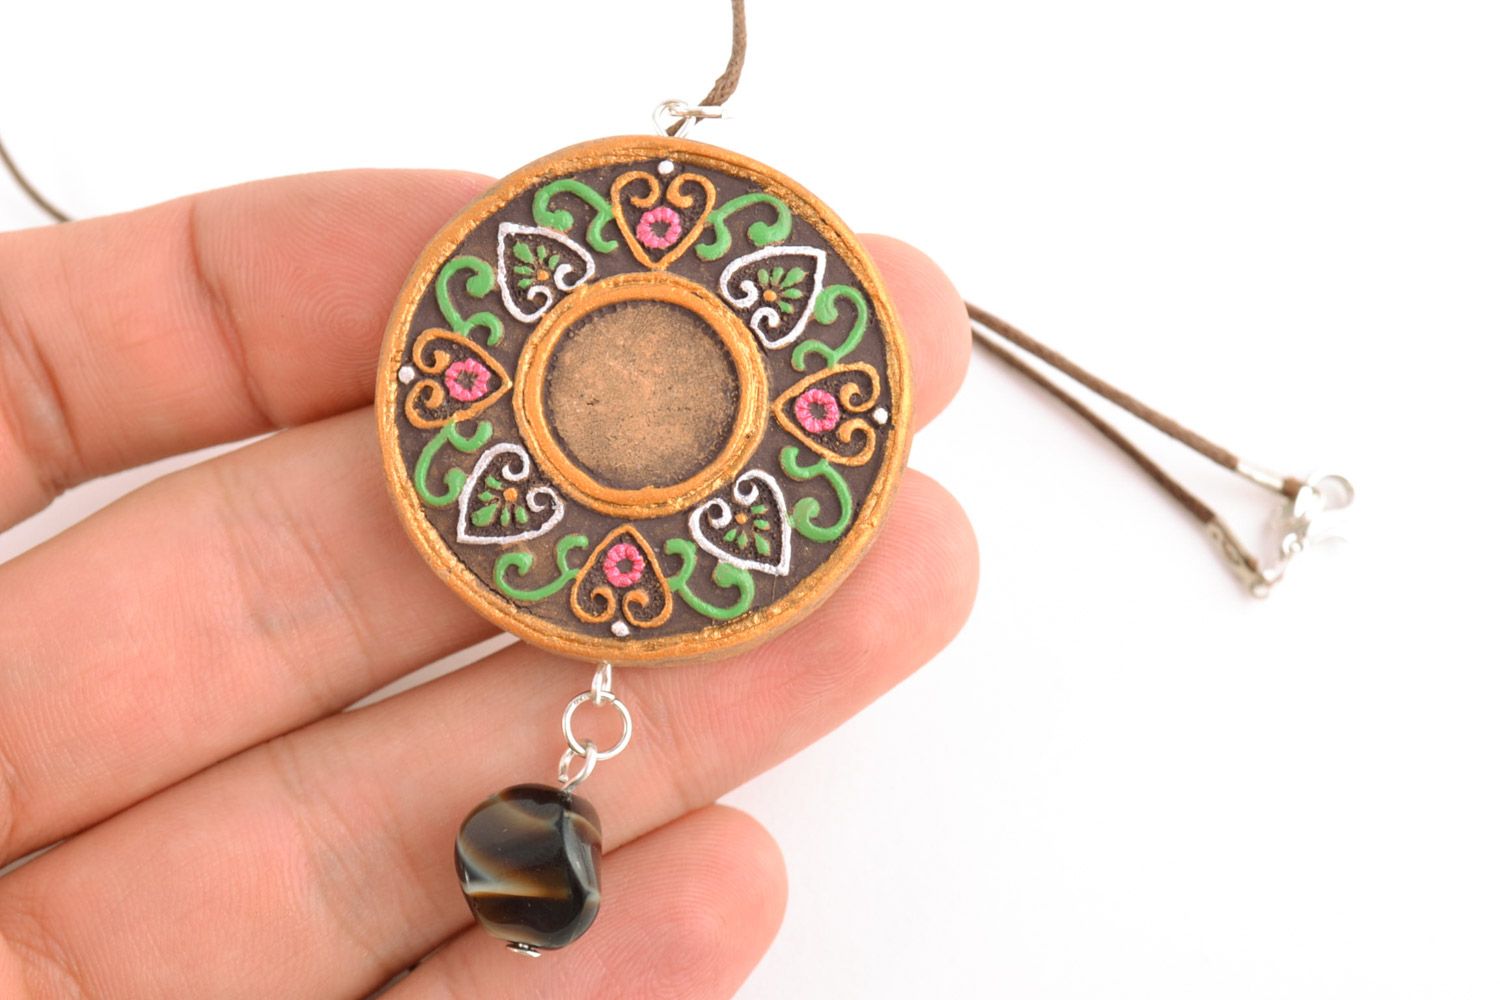 Handmade round ceramic pendant with floral ornament painted with acrylics on cord photo 2